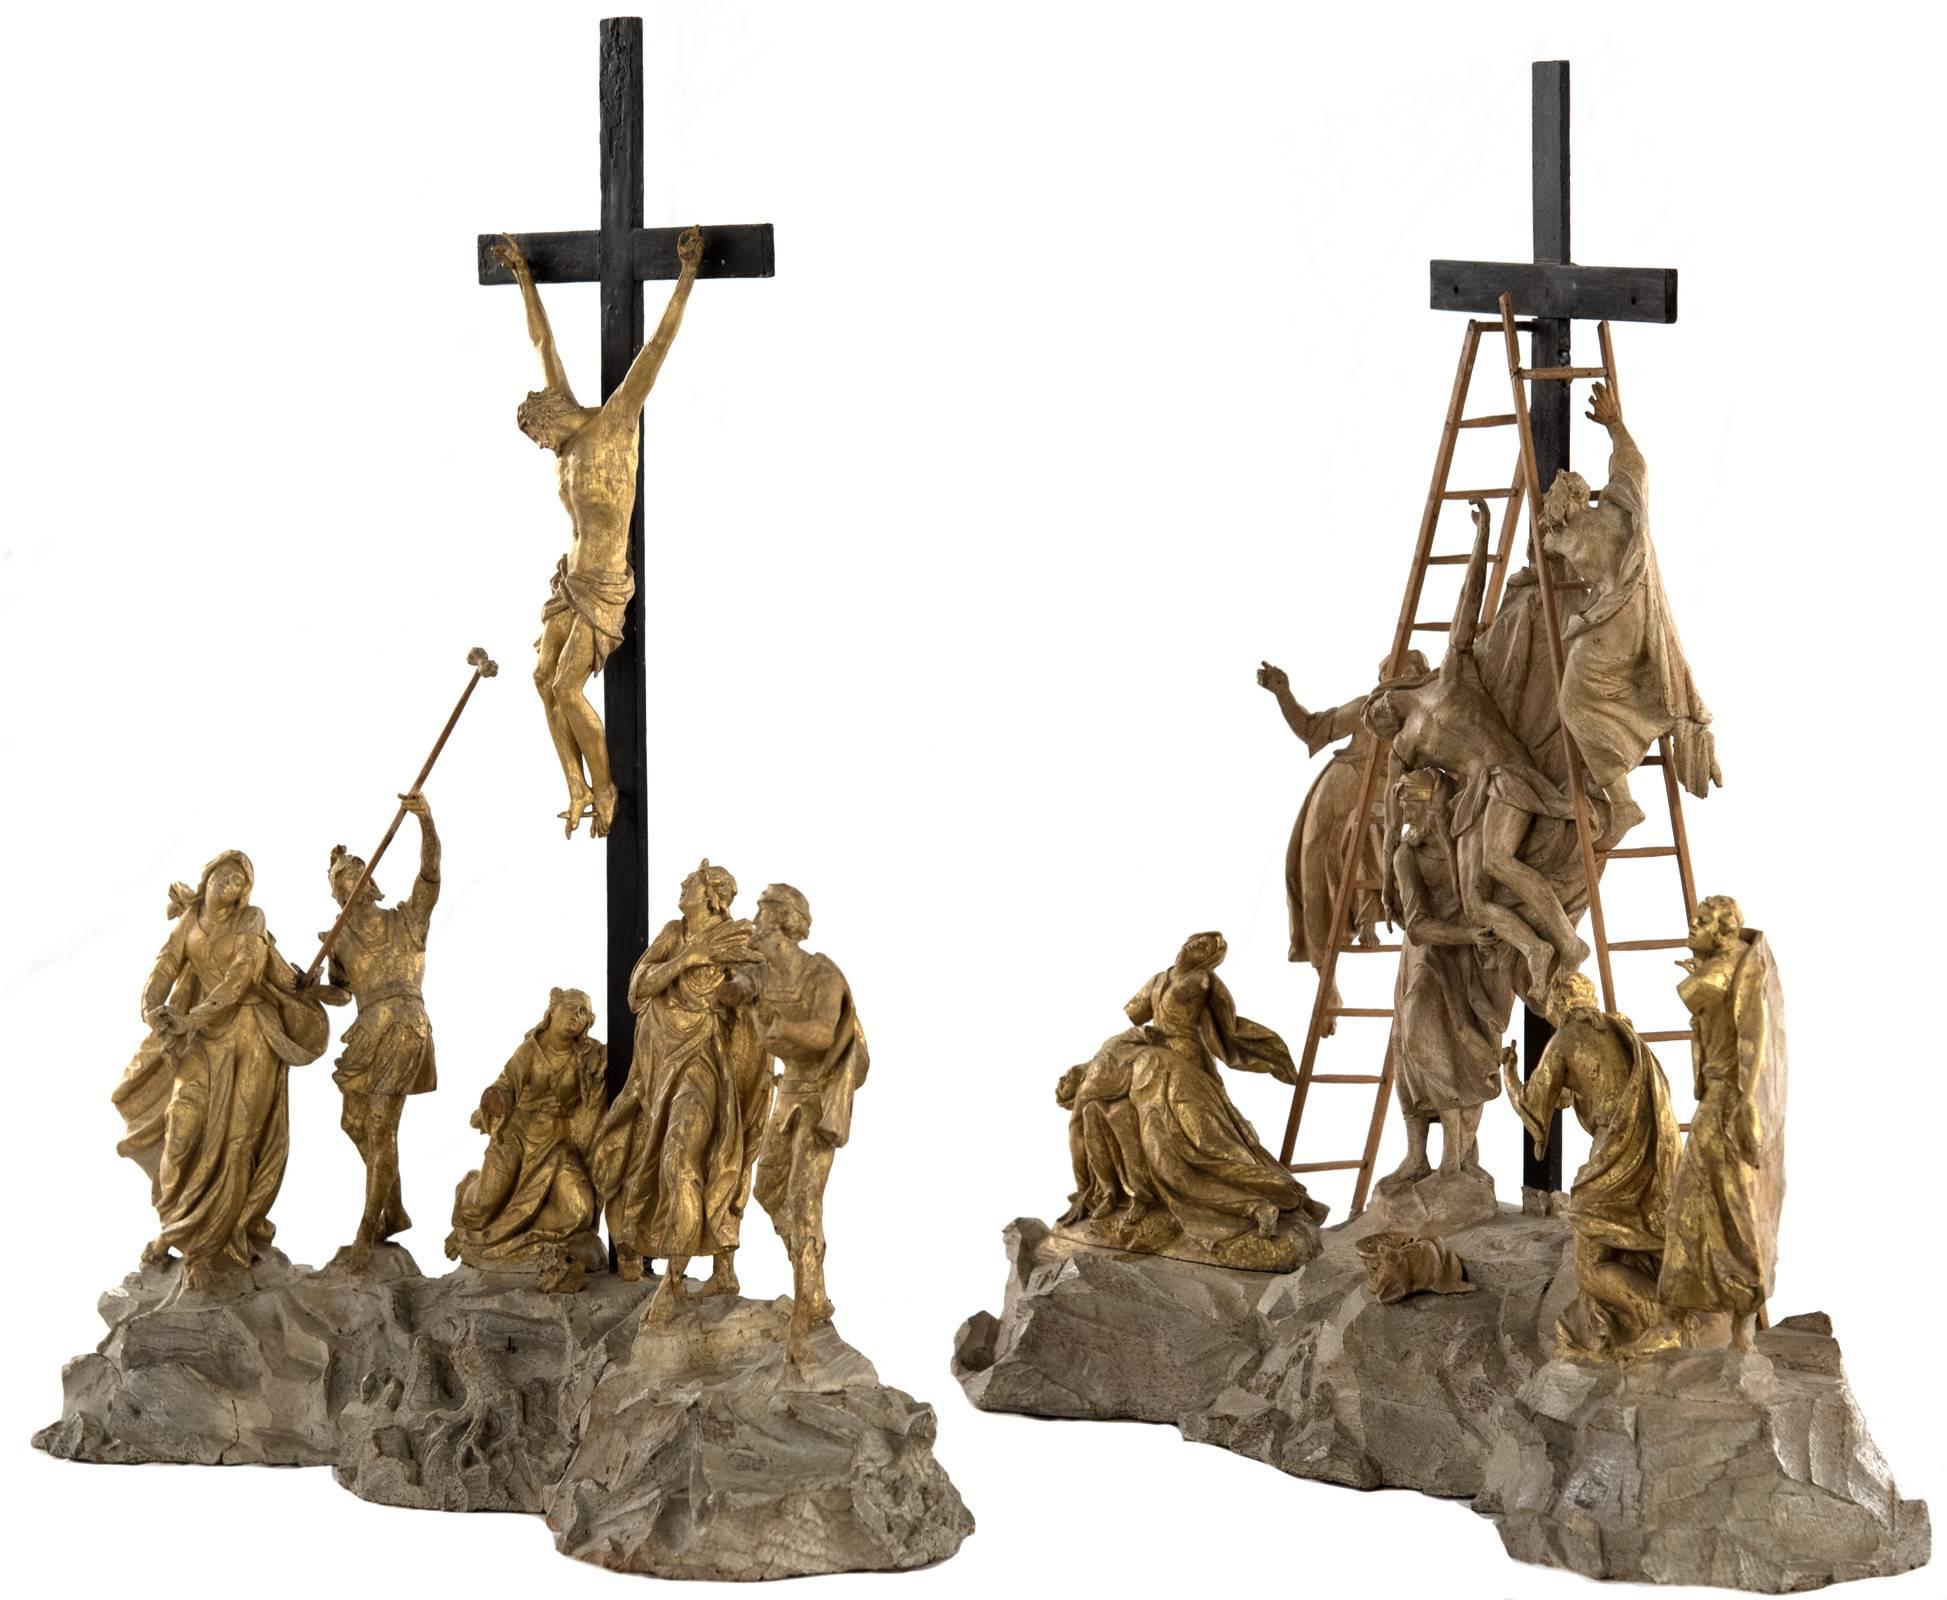 A set of finely hand-carved wooden figural scenes, decorated with gold leaf, depicting two integral events of the crucifixion of Christ. In each composition, figural groupings surround the cross that is mounted into the naturalized rocky ground; the